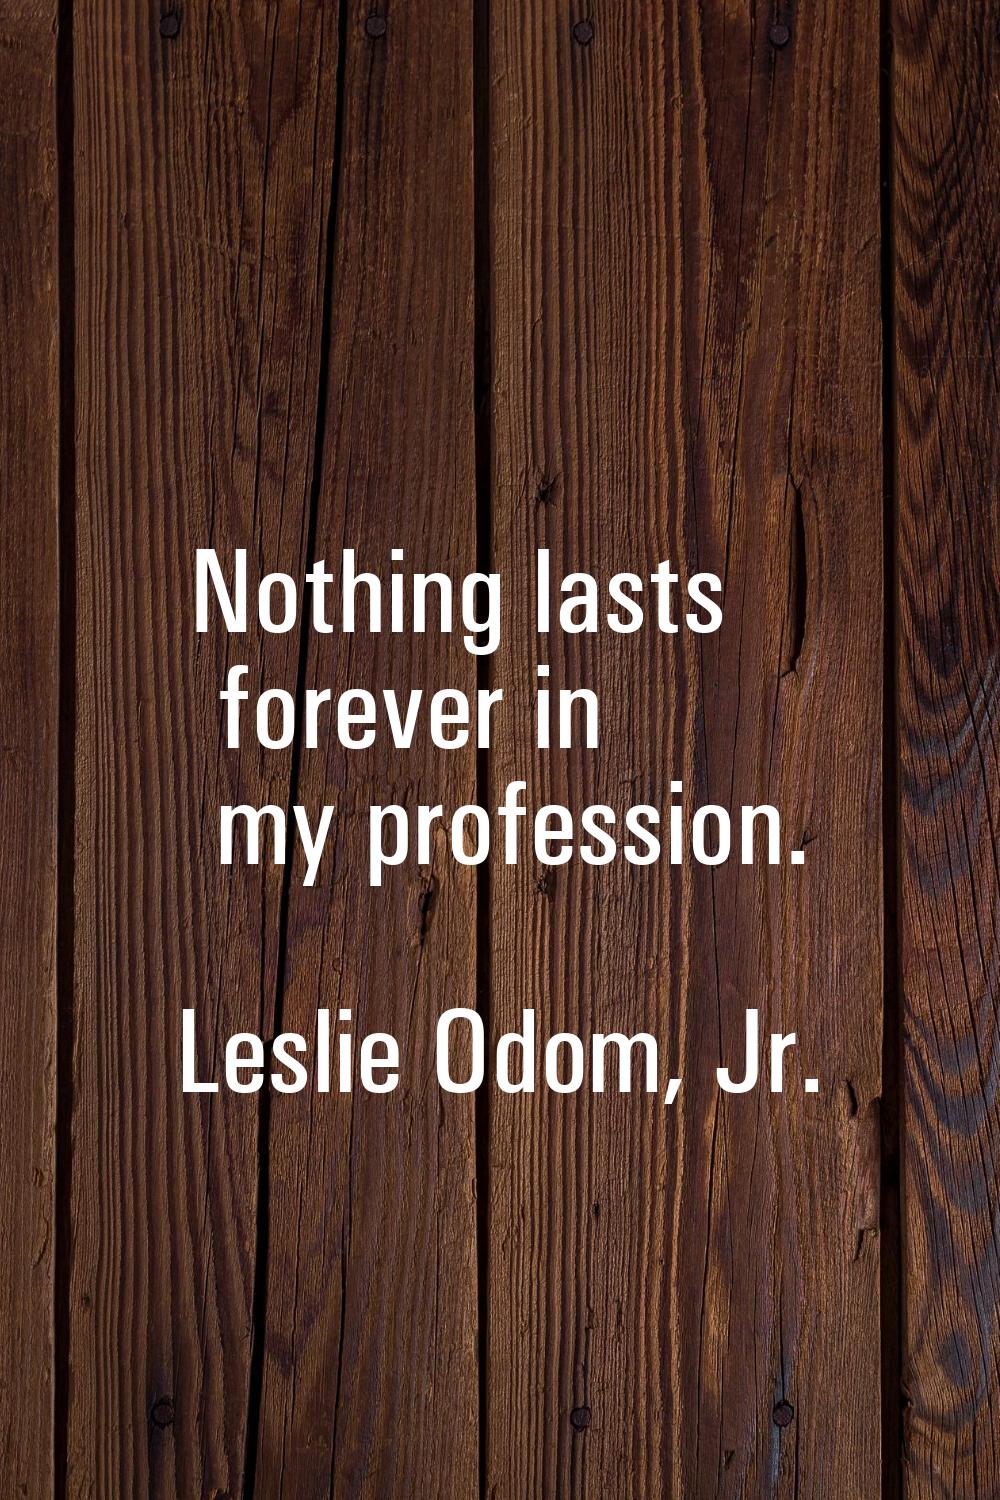 Nothing lasts forever in my profession.